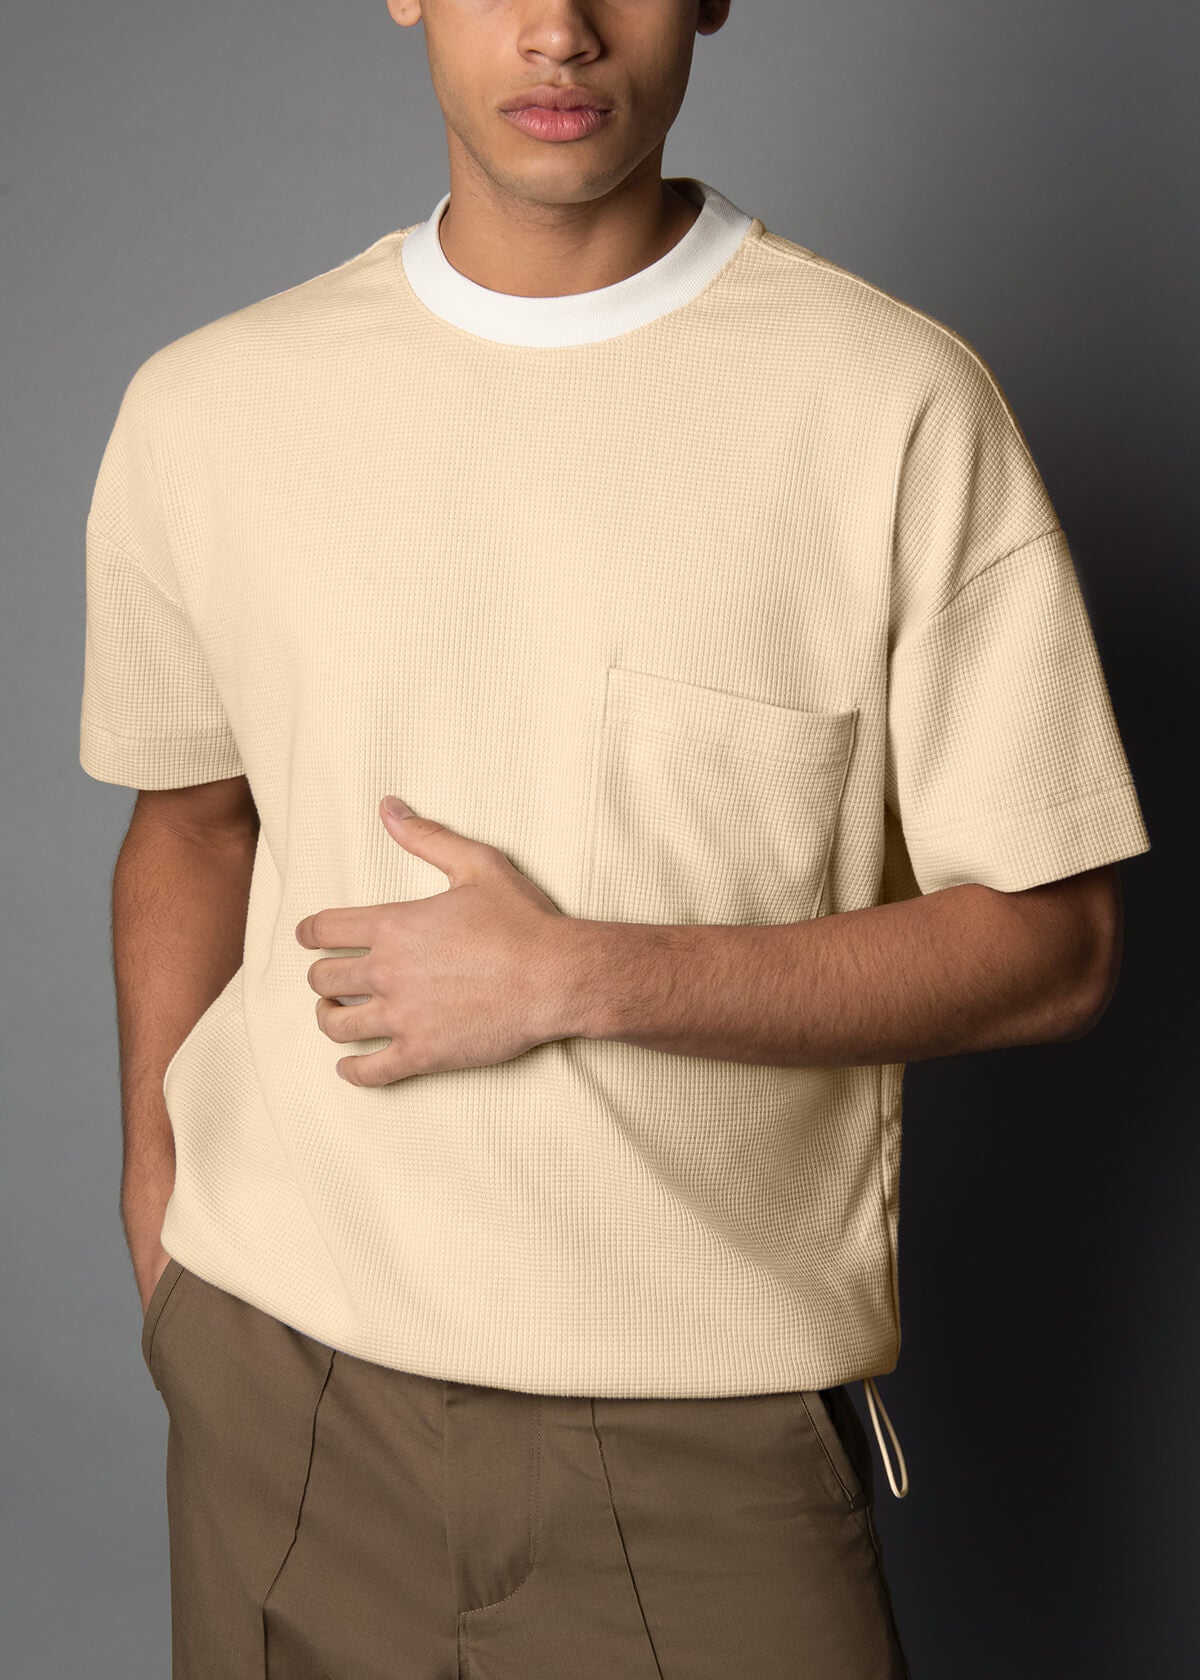 cream colored mens tee with a crew neck